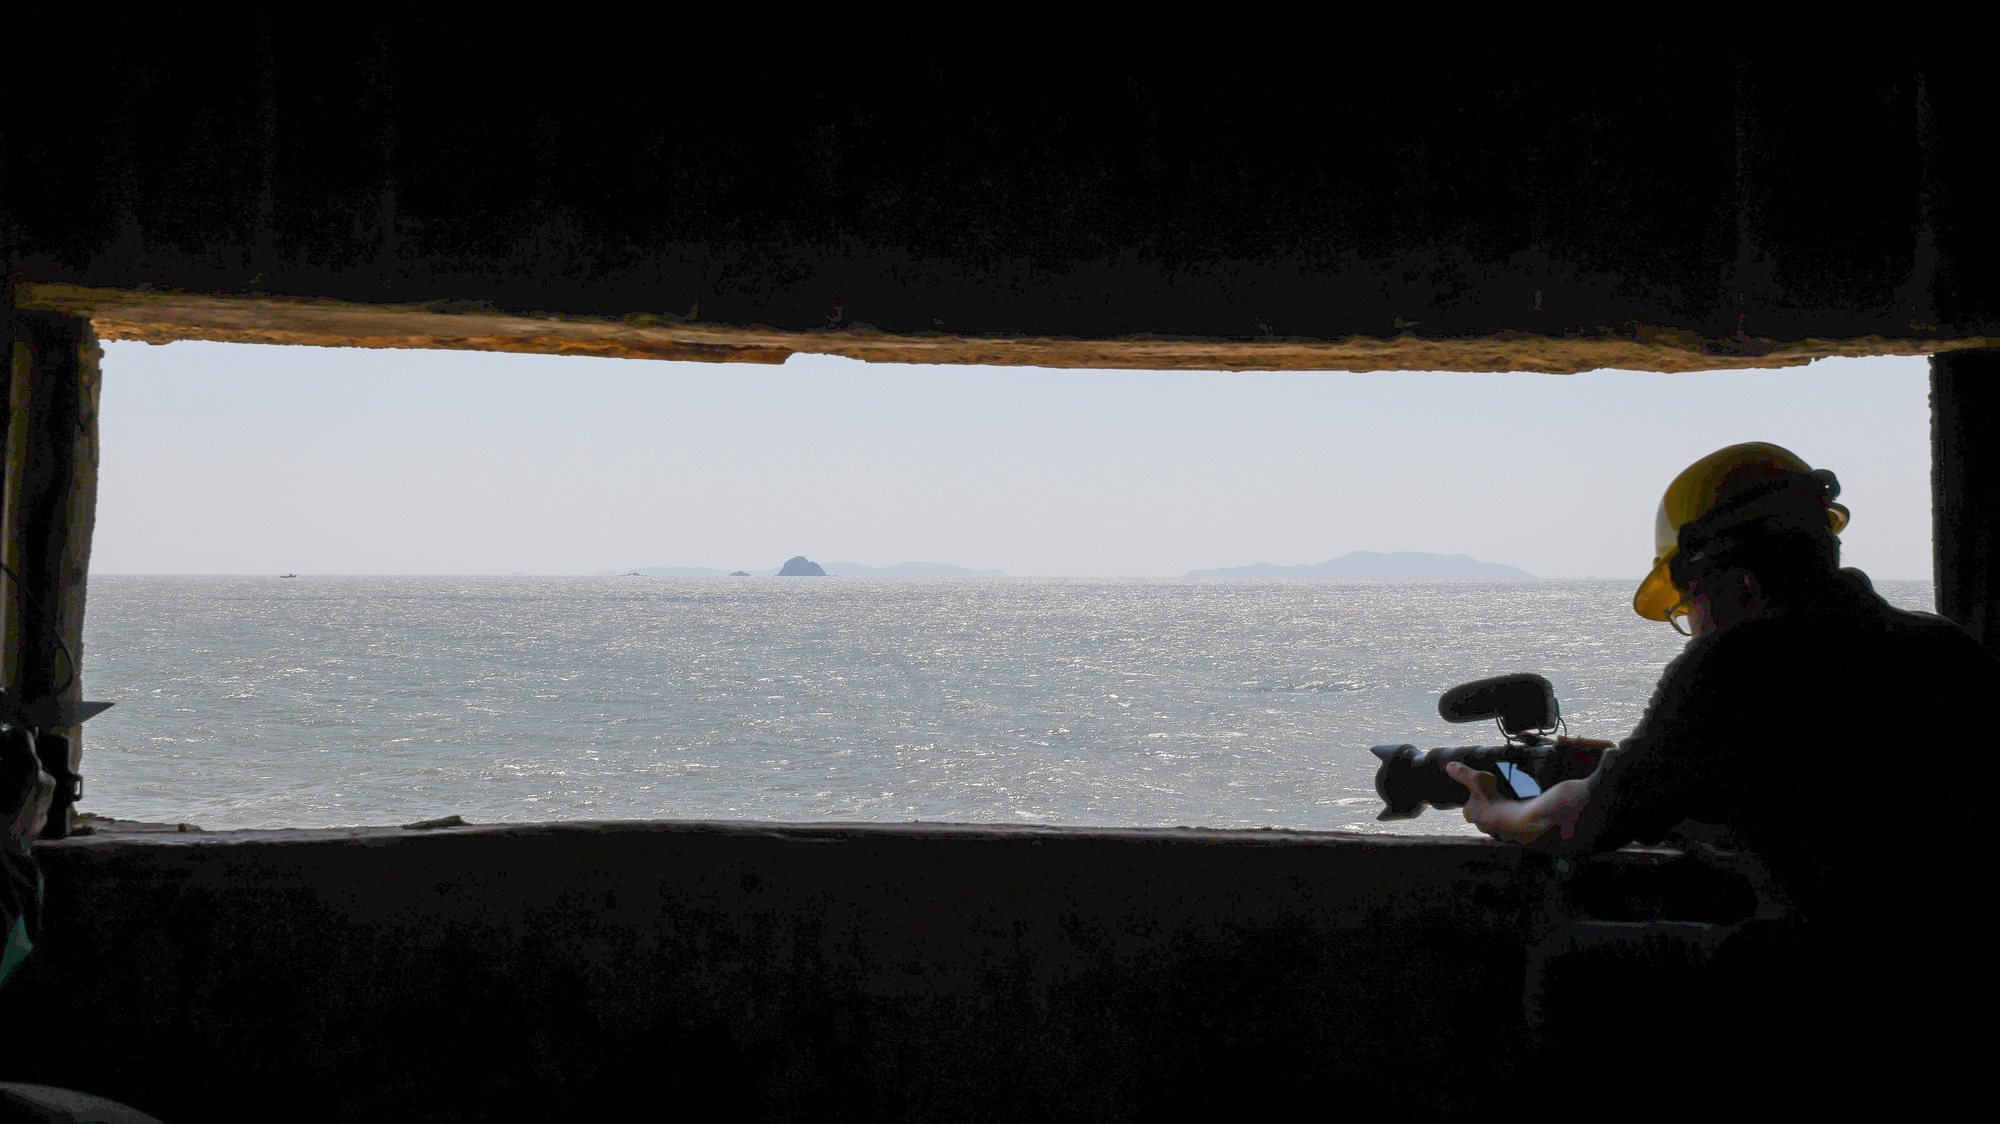 epa10914403 A man film from a window inside one of the 26 old military wartime tunnels during the Matsu Biennial art exhibition in Nangan, Matsu Islands, Taiwan, 12 October 2023. Matsu Biennial showcases local artists&#039; creative perspectives on the island through an &#039;island perspective&#039; project at Chungshan Gate on Nangan Island. The exhibition, reinterpreted as an arts and culture venue, aims to launch Matsu&#039;s arts and culture internationally, marking the first significant exhibition since Chungshan Gate&#039;s transformation. The Matsu Islands, a group of 36 islands in the East China Sea, are the smallest county in Taiwan.  EPA/RITCHIE B. TONGO